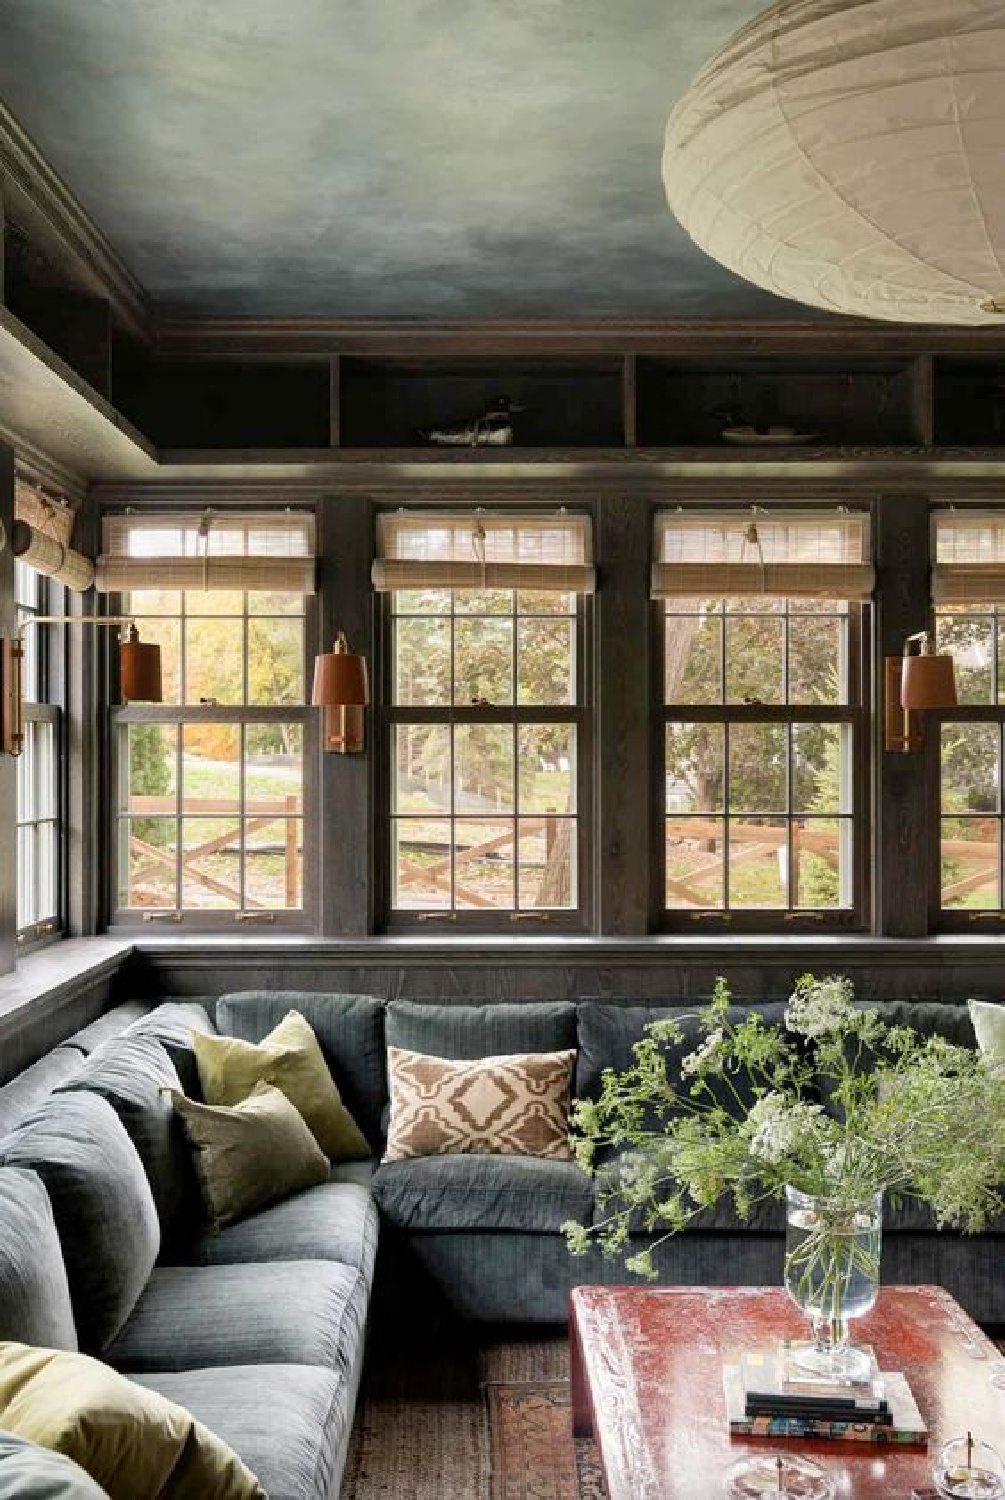 Rehkamp Larson Architects - a lovely European country style cozy living space in a Deephaven, MN home. #europeancountry #modernrustic #rusticelegance